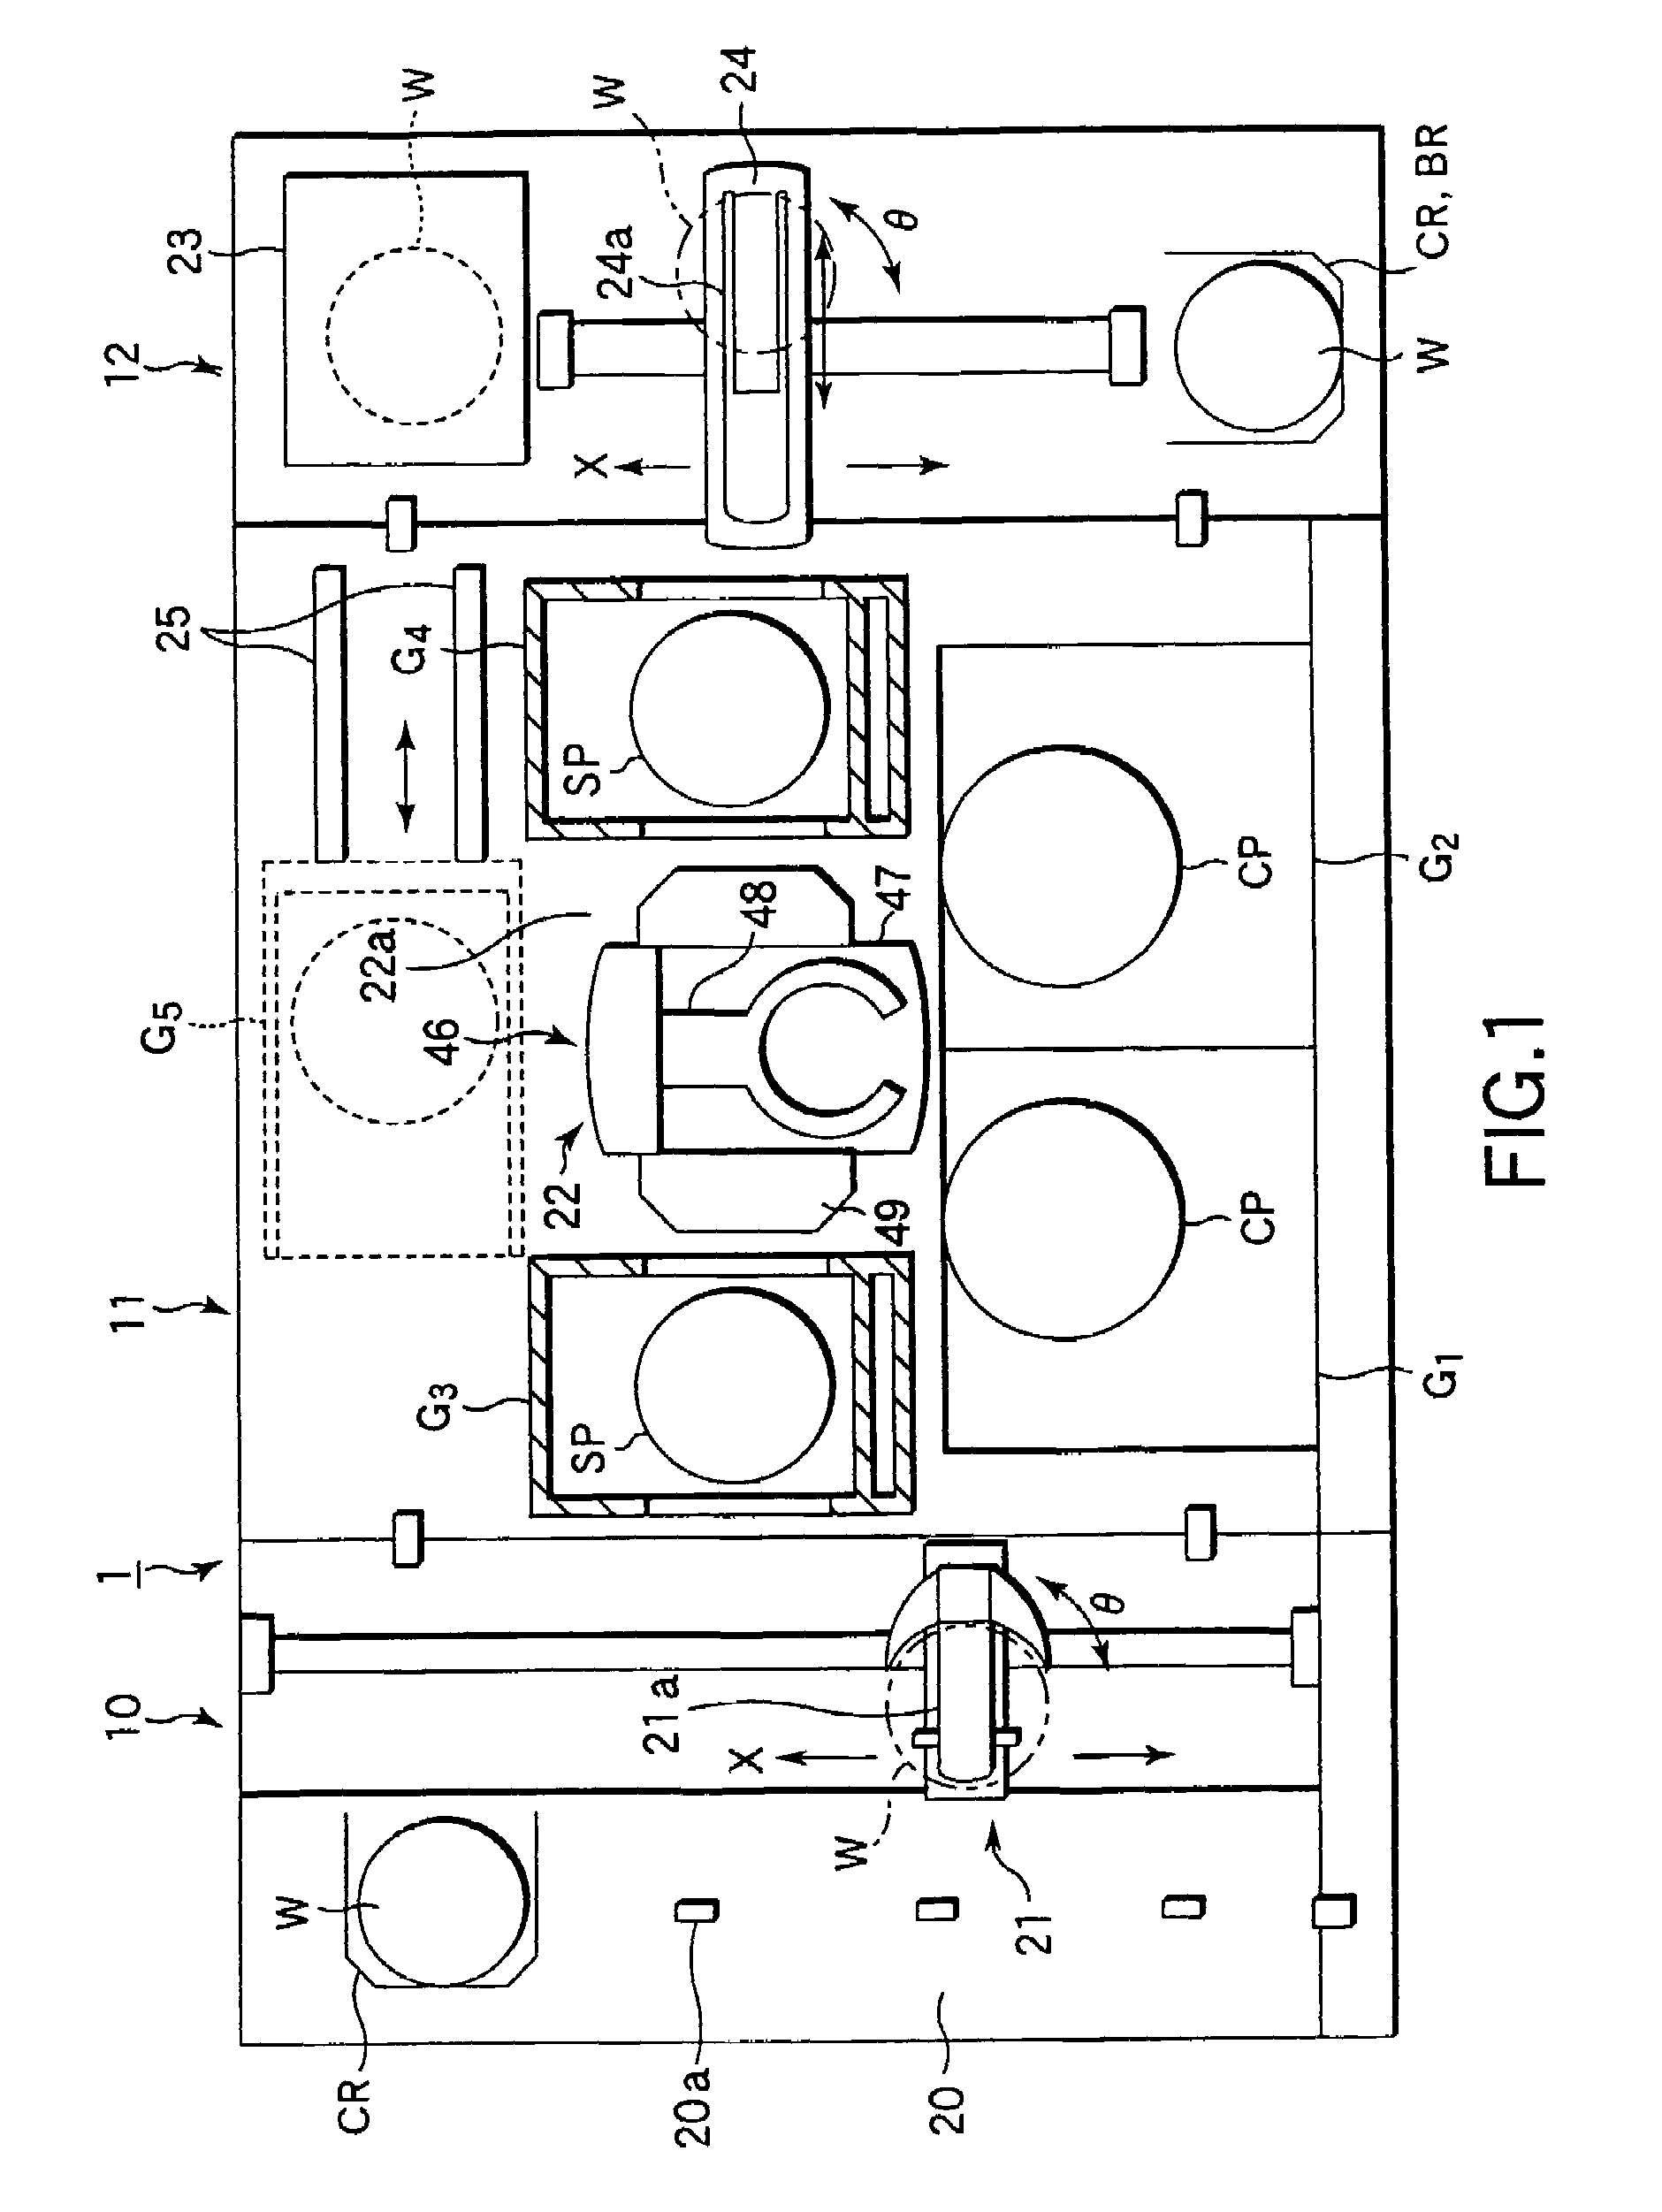 Method for developing processing and apparatus for supplying developing solution